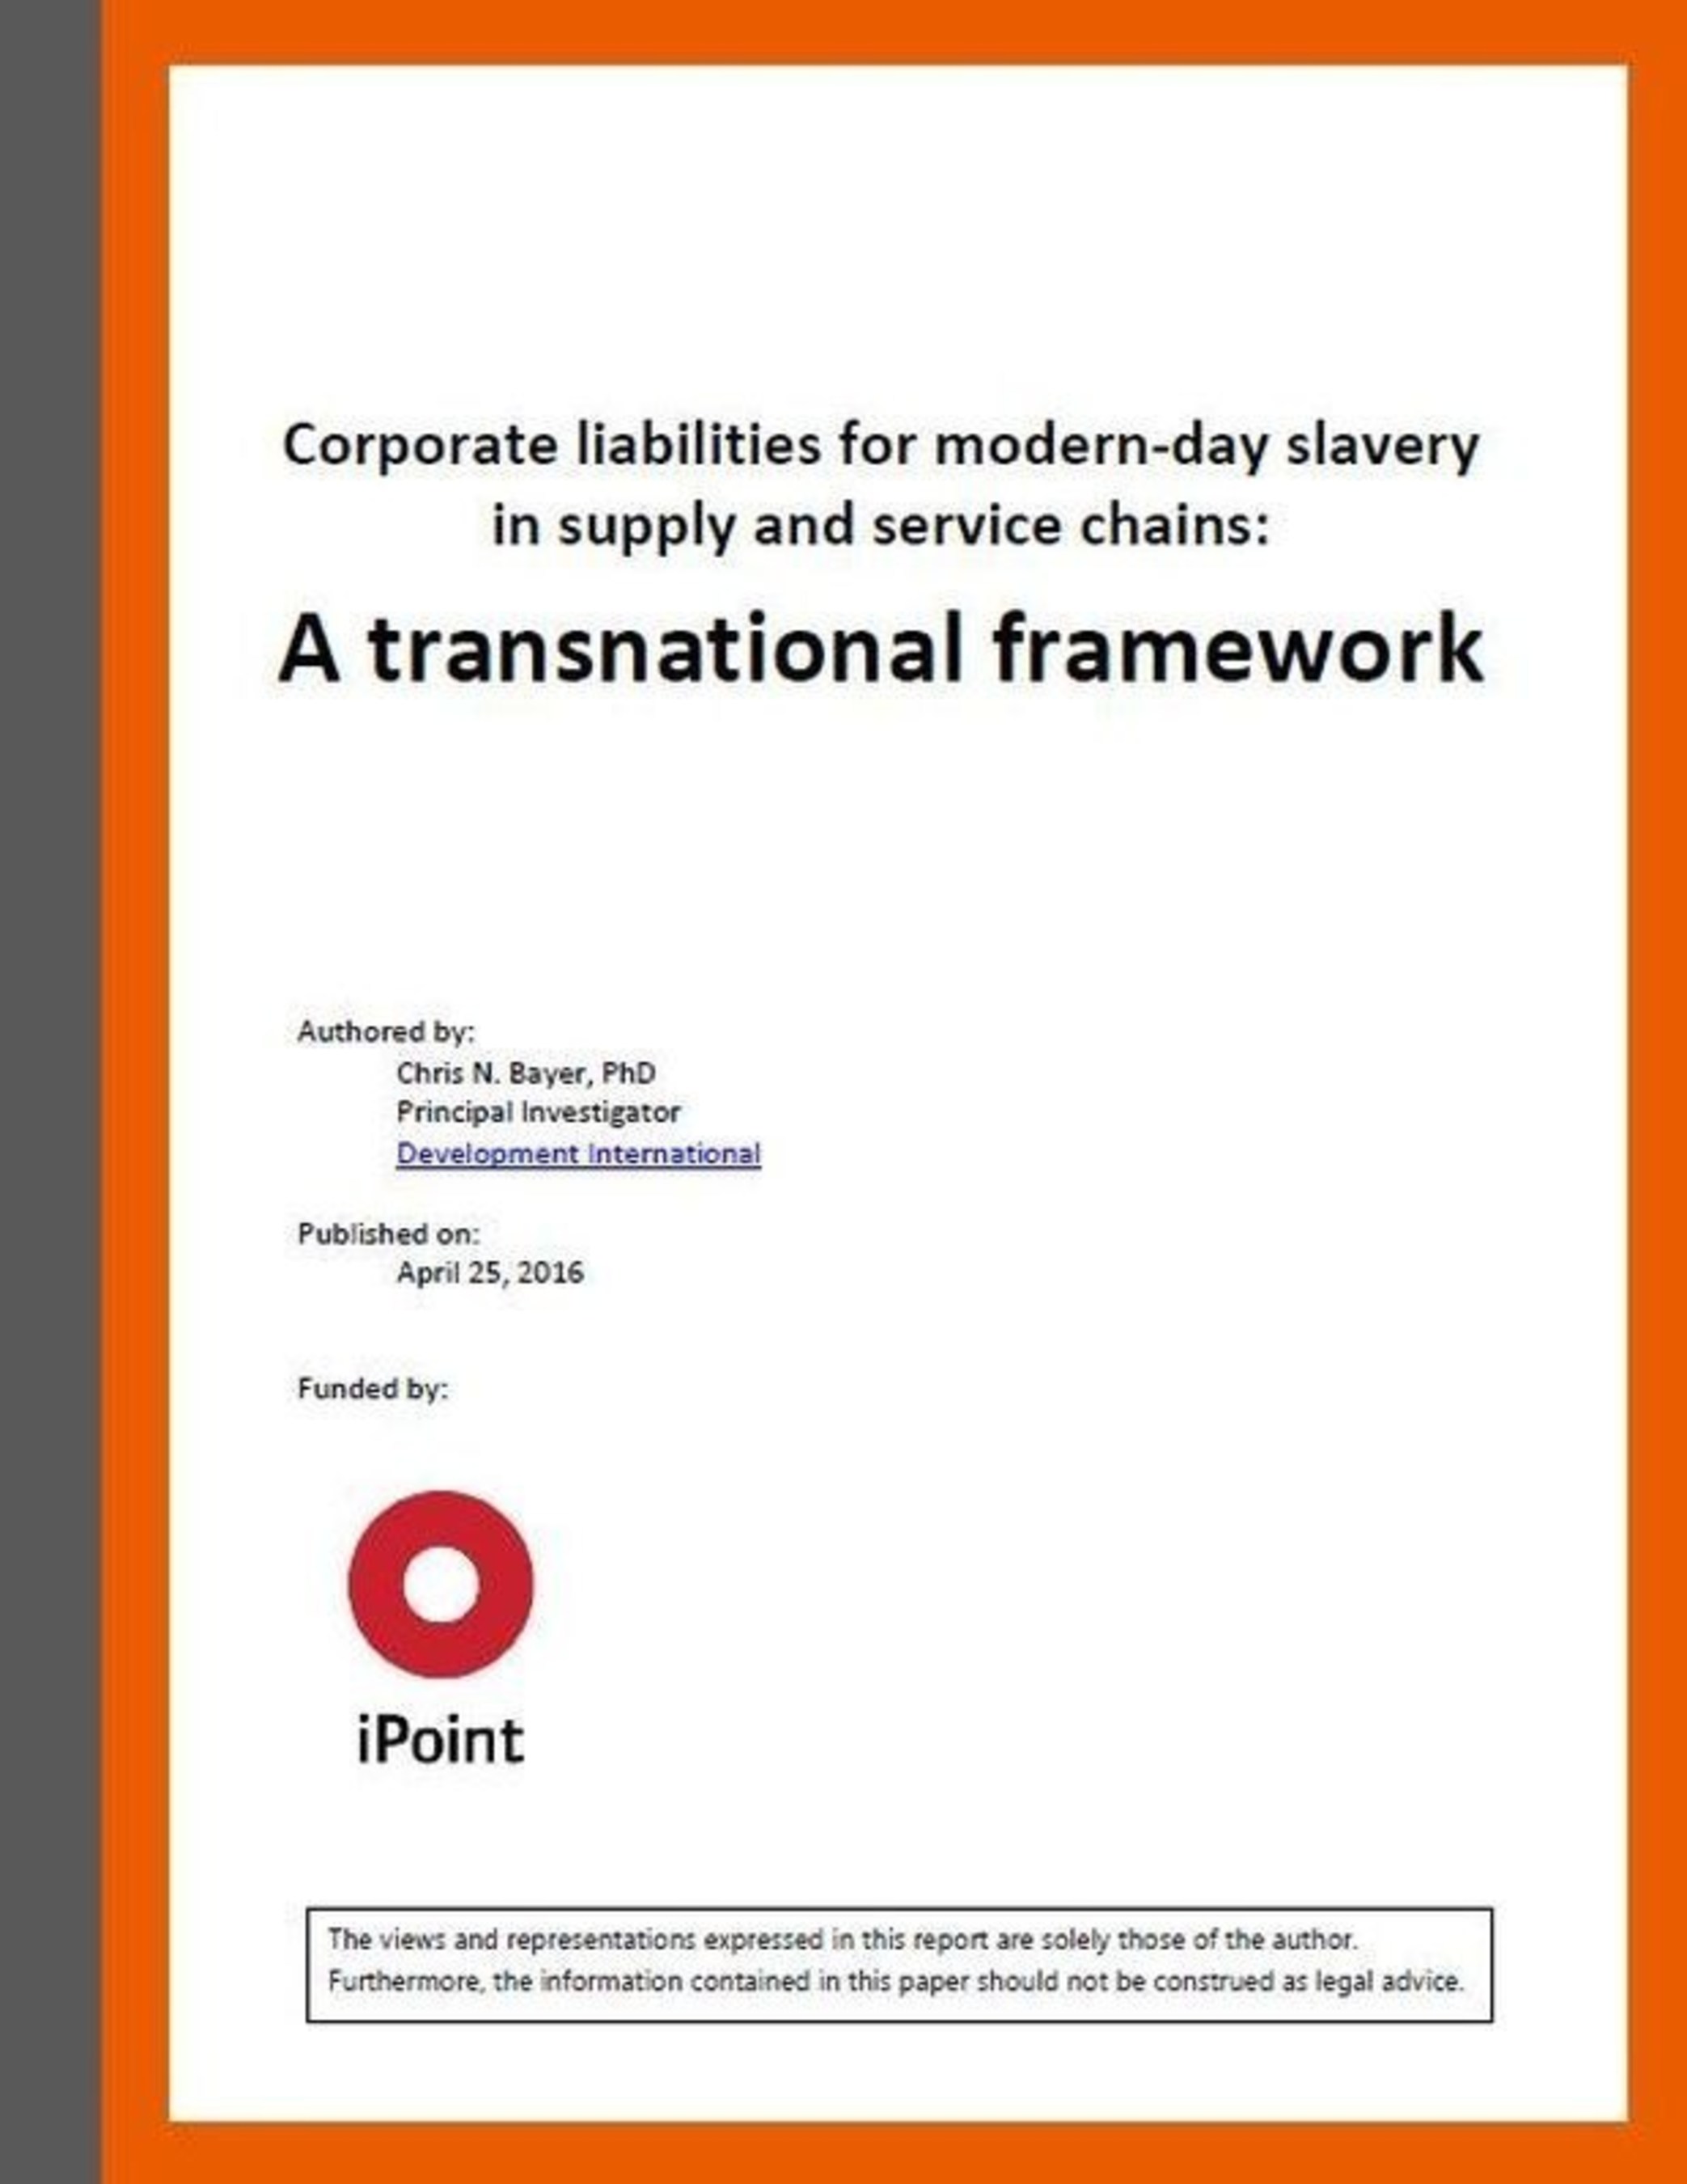 Corporate liabilities for modern-day slavery in supply and service chains: A transnational framework (Author: Dr. Chris N. Bayer. Published on April 25, 2016. Funded by iPoint-systems gmbh) (PRNewsFoto/iPoint-systems)